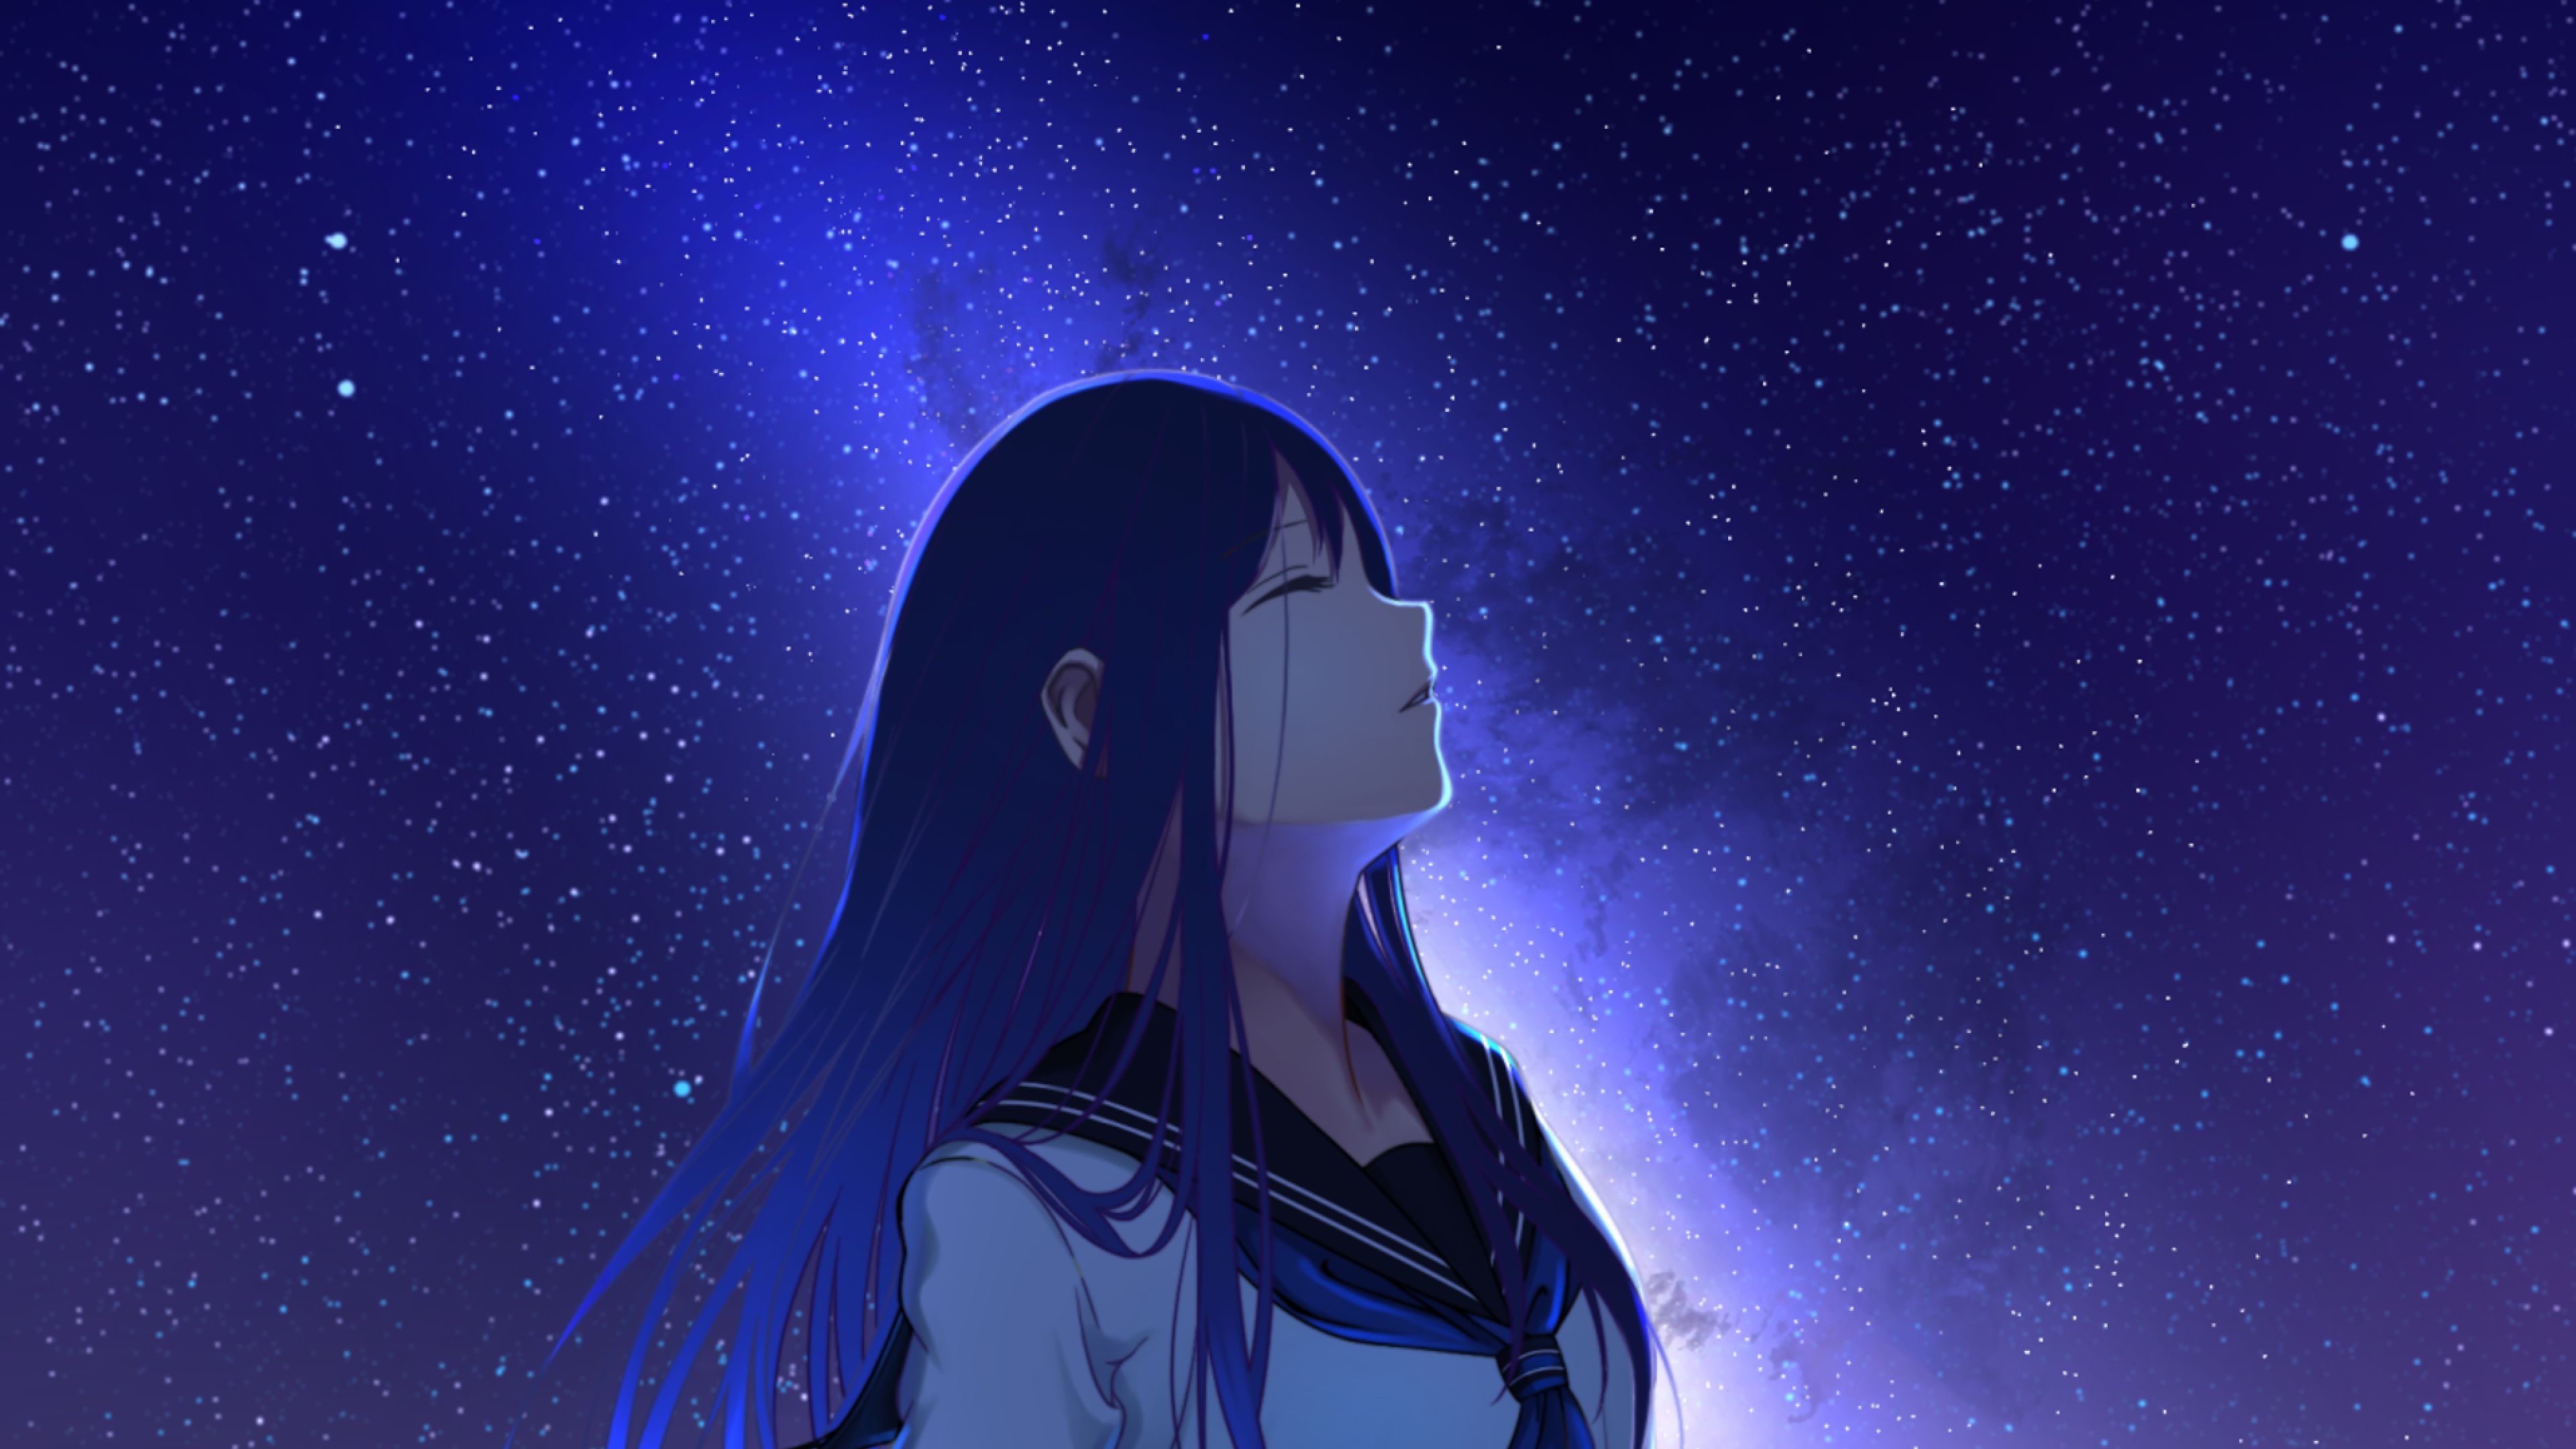 Anime Girl And Night Stars 4K Wallpaper, HD Anime 4K Wallpaper, Image, Photo and Background